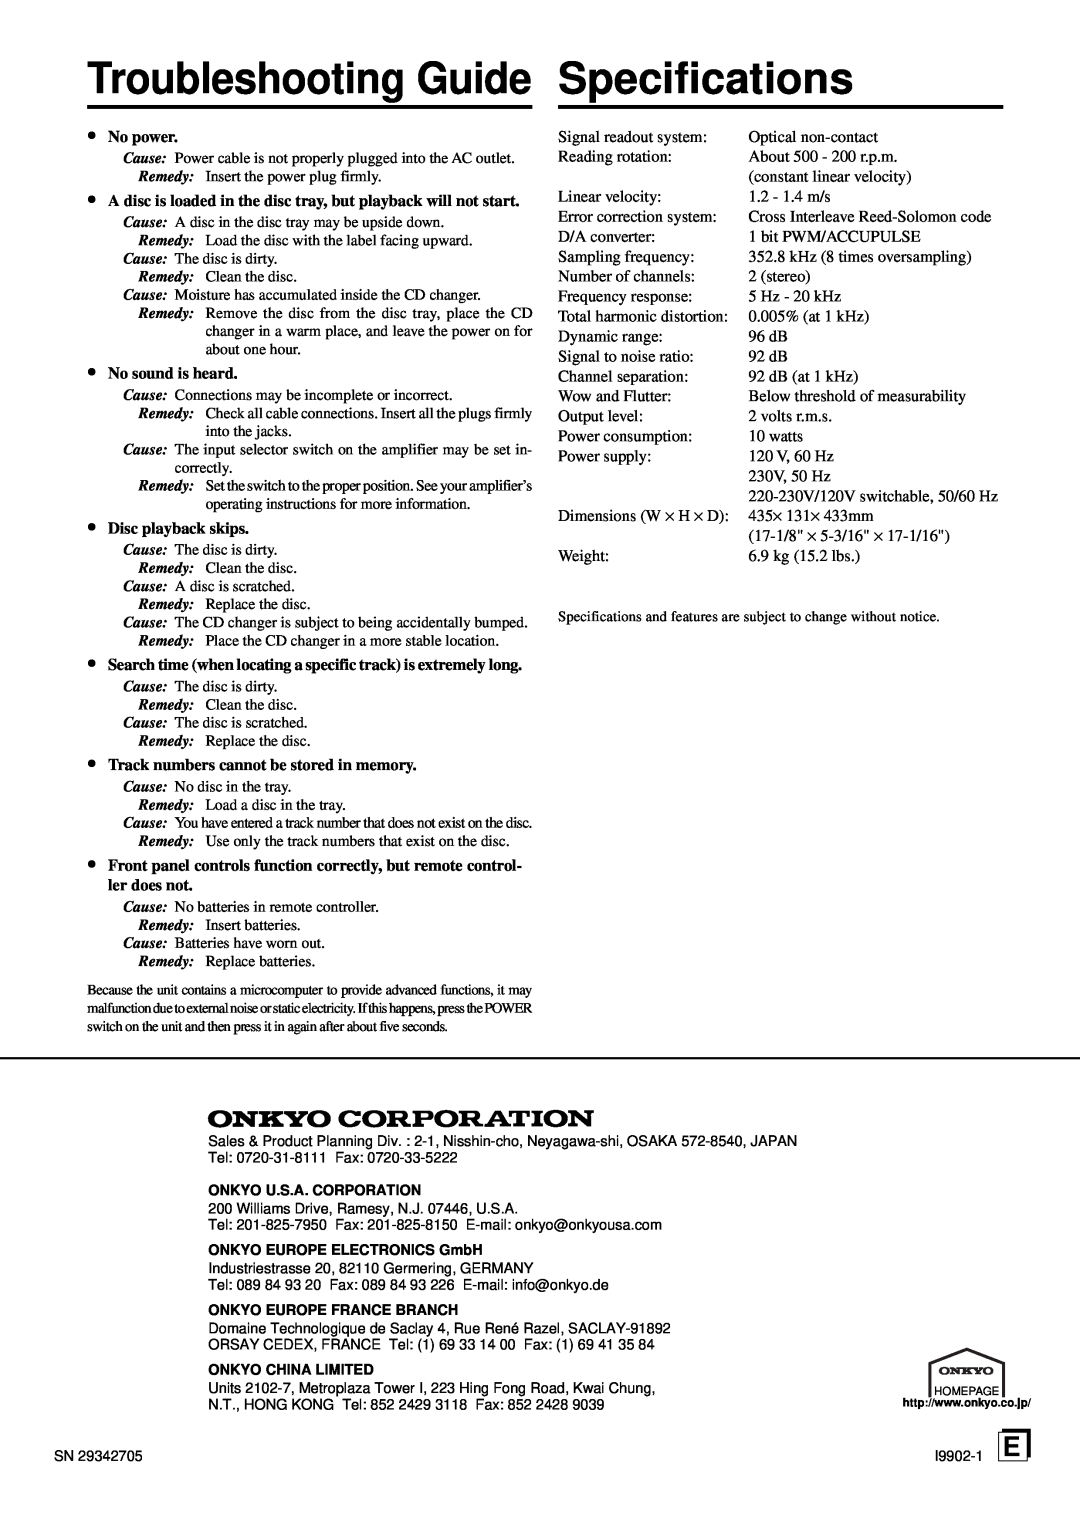 Onkyo DX-C370 instruction manual Specifications, Troubleshooting Guide, No power, No sound is heard, Disc playback skips 